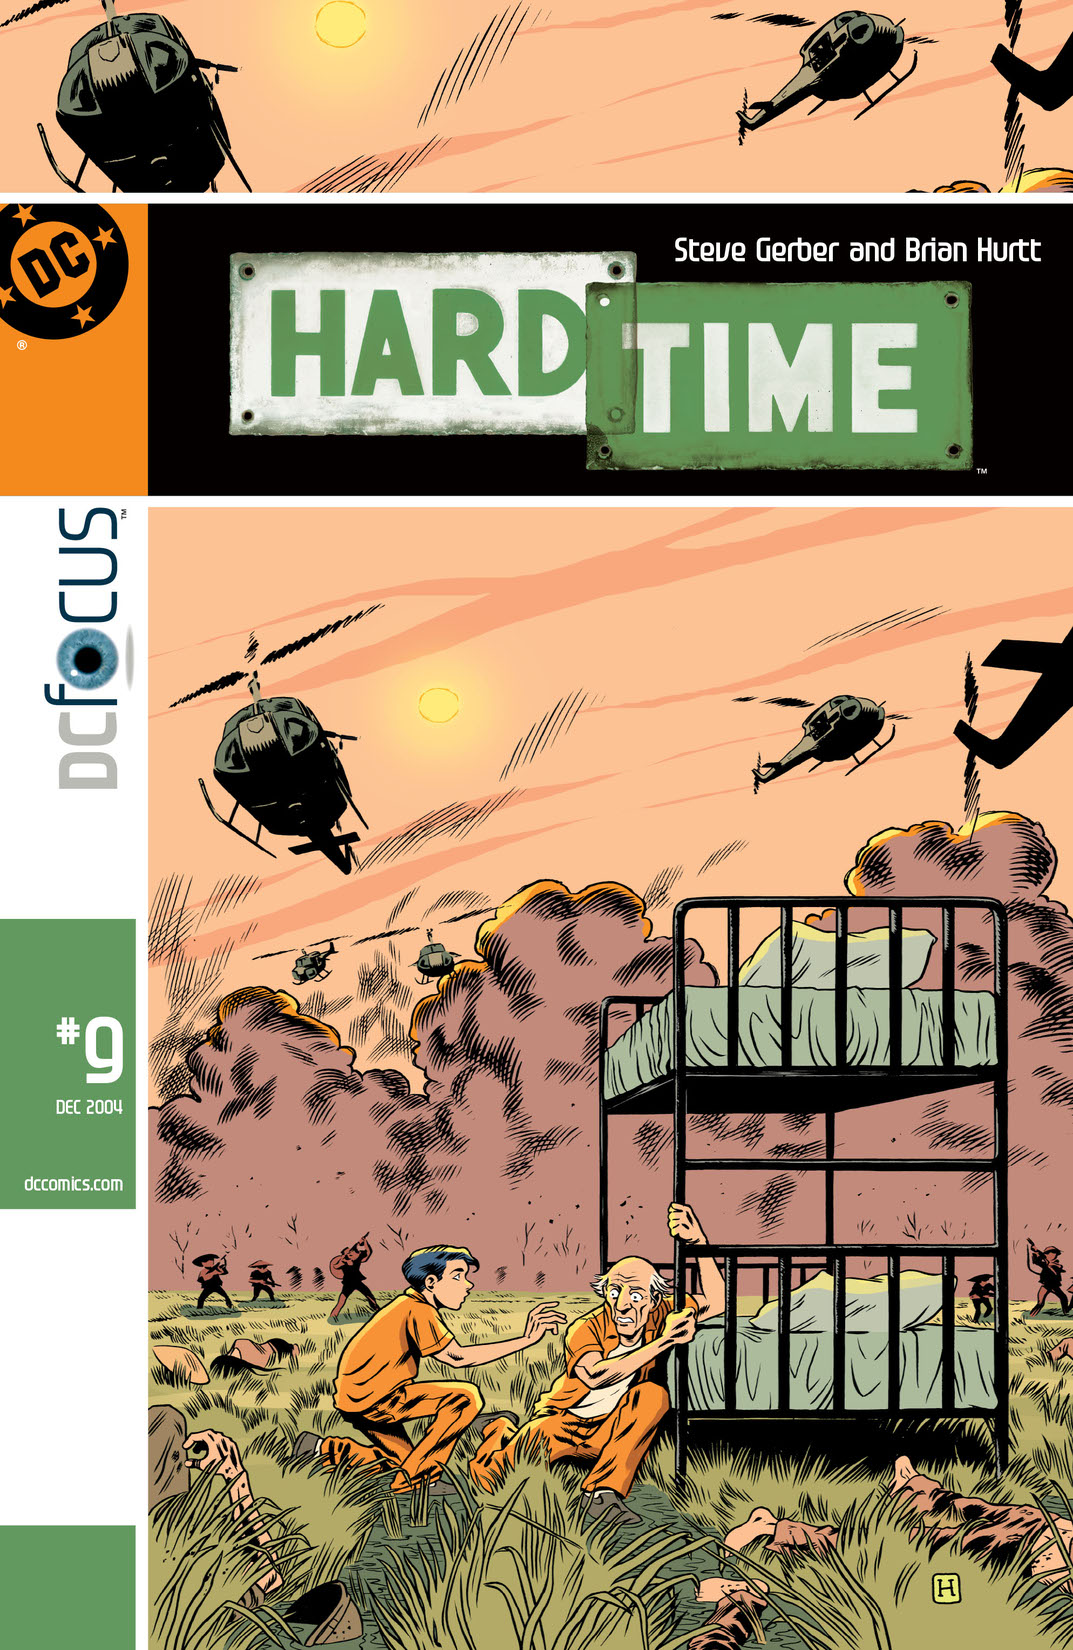 Hard Time #9 preview images